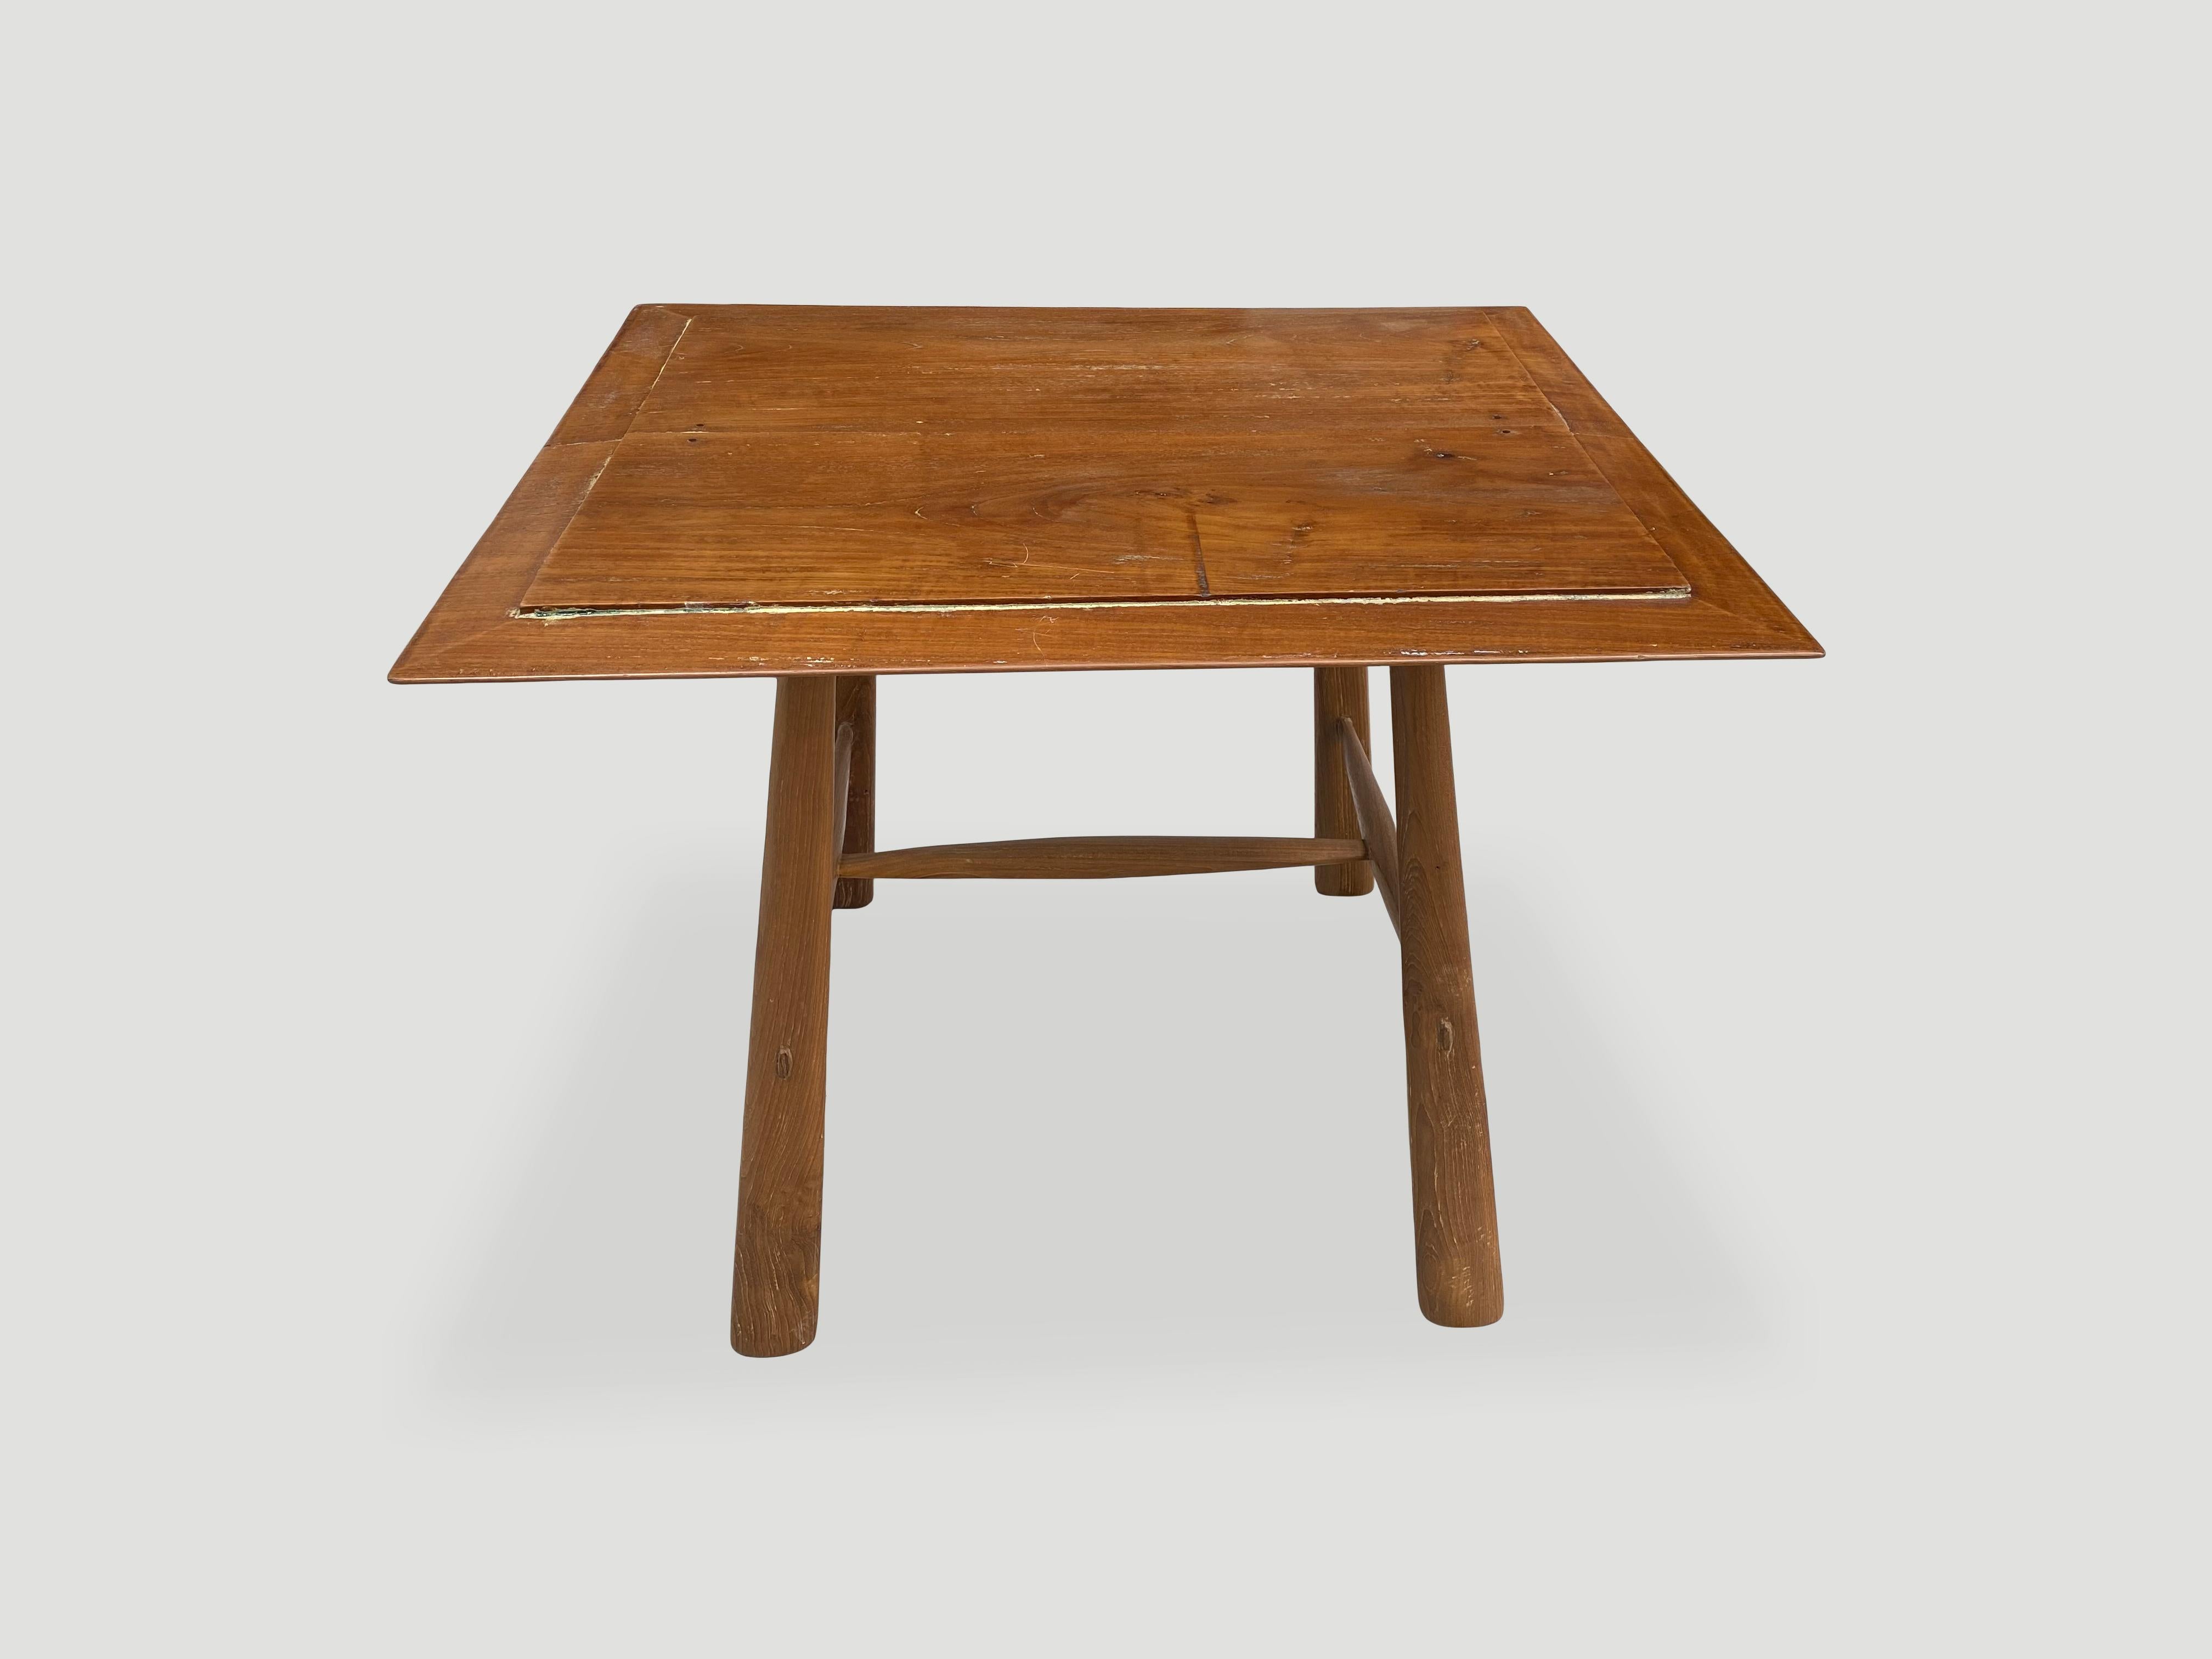 Andrianna Shamaris Midcentury Couture Teak Wood Cocktail Table or Entry Table For Sale 2